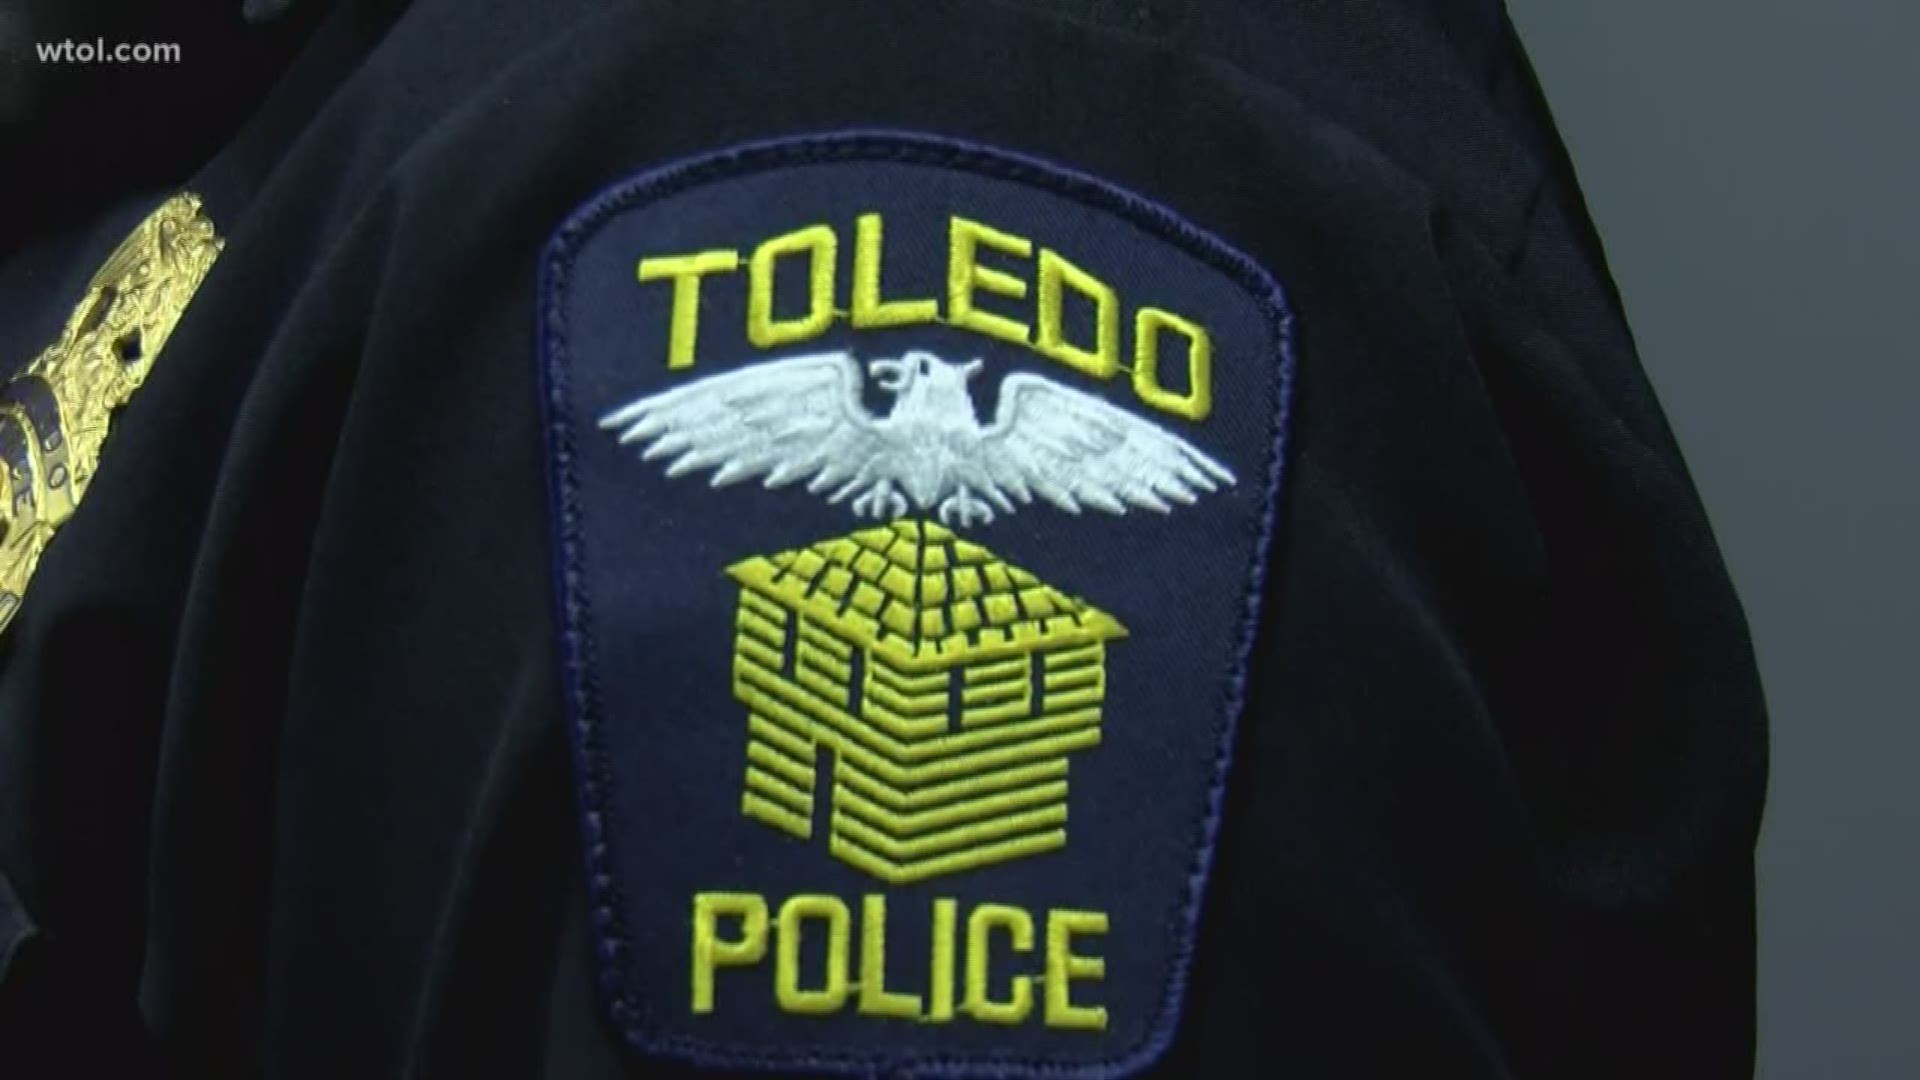 "Still Missing" is a new social media effort from the Toledo police force to find missing people.